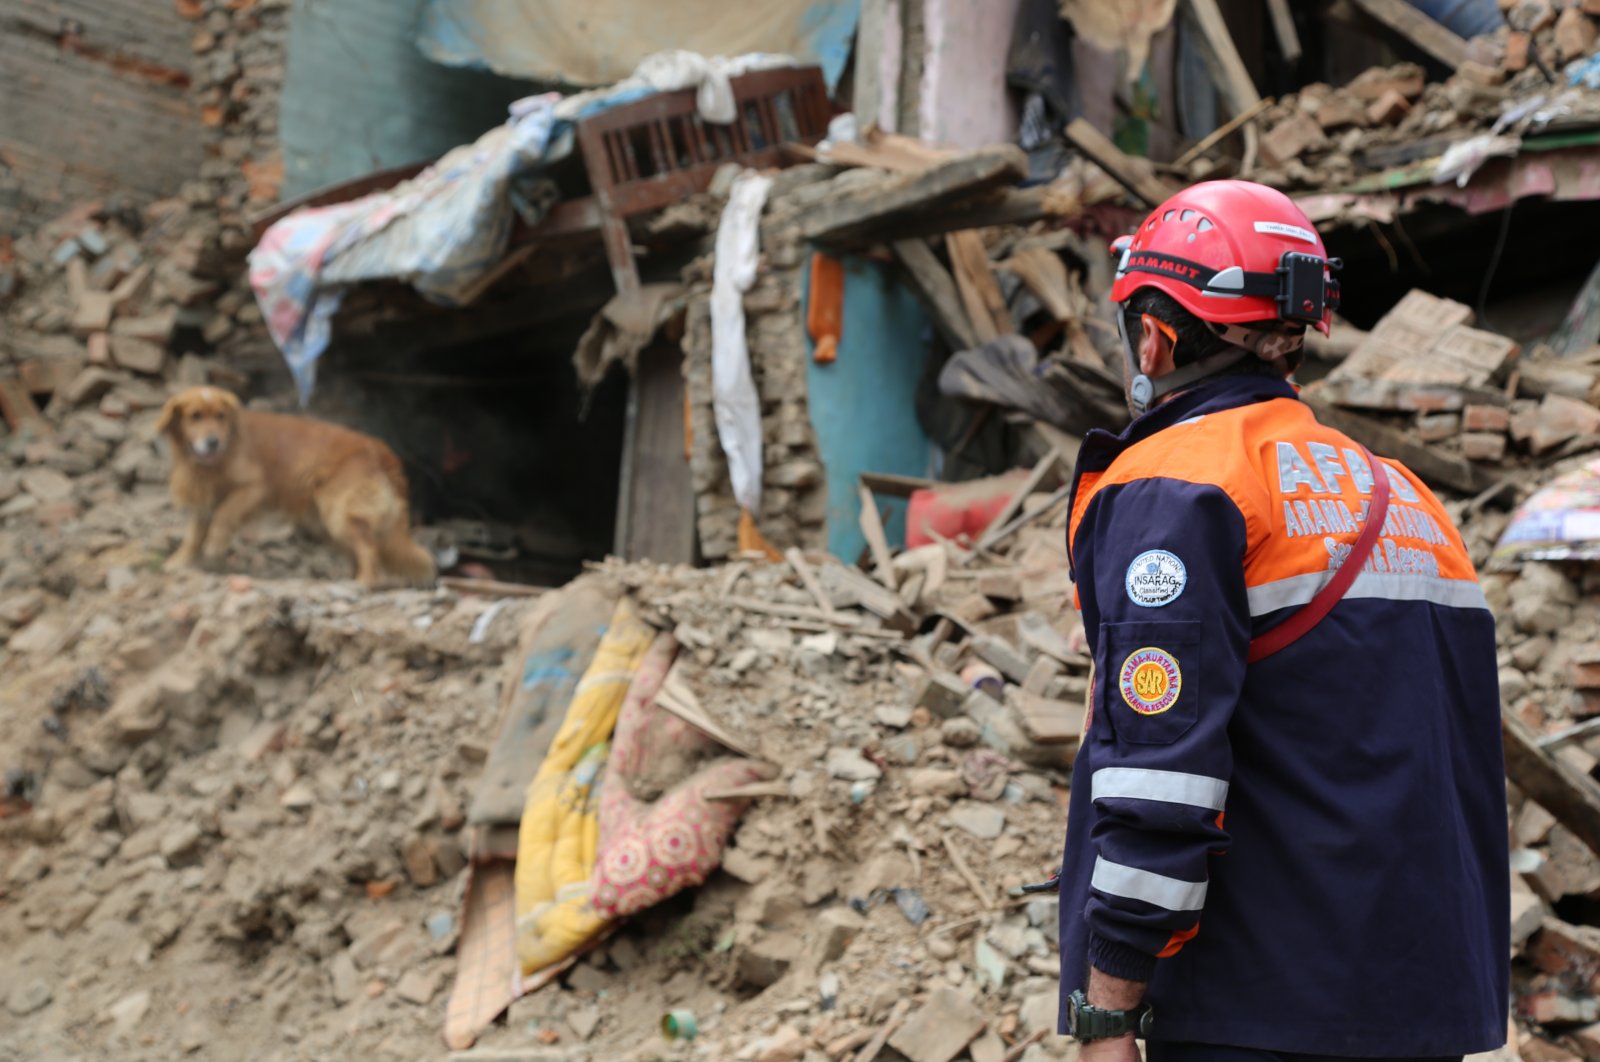 Türkiye Disaster and Emergency Management Authority officials conduct a search after an earthquake in Istanbul, Türkiye, Oct. 6, 2016. (Shutterstock Photo)